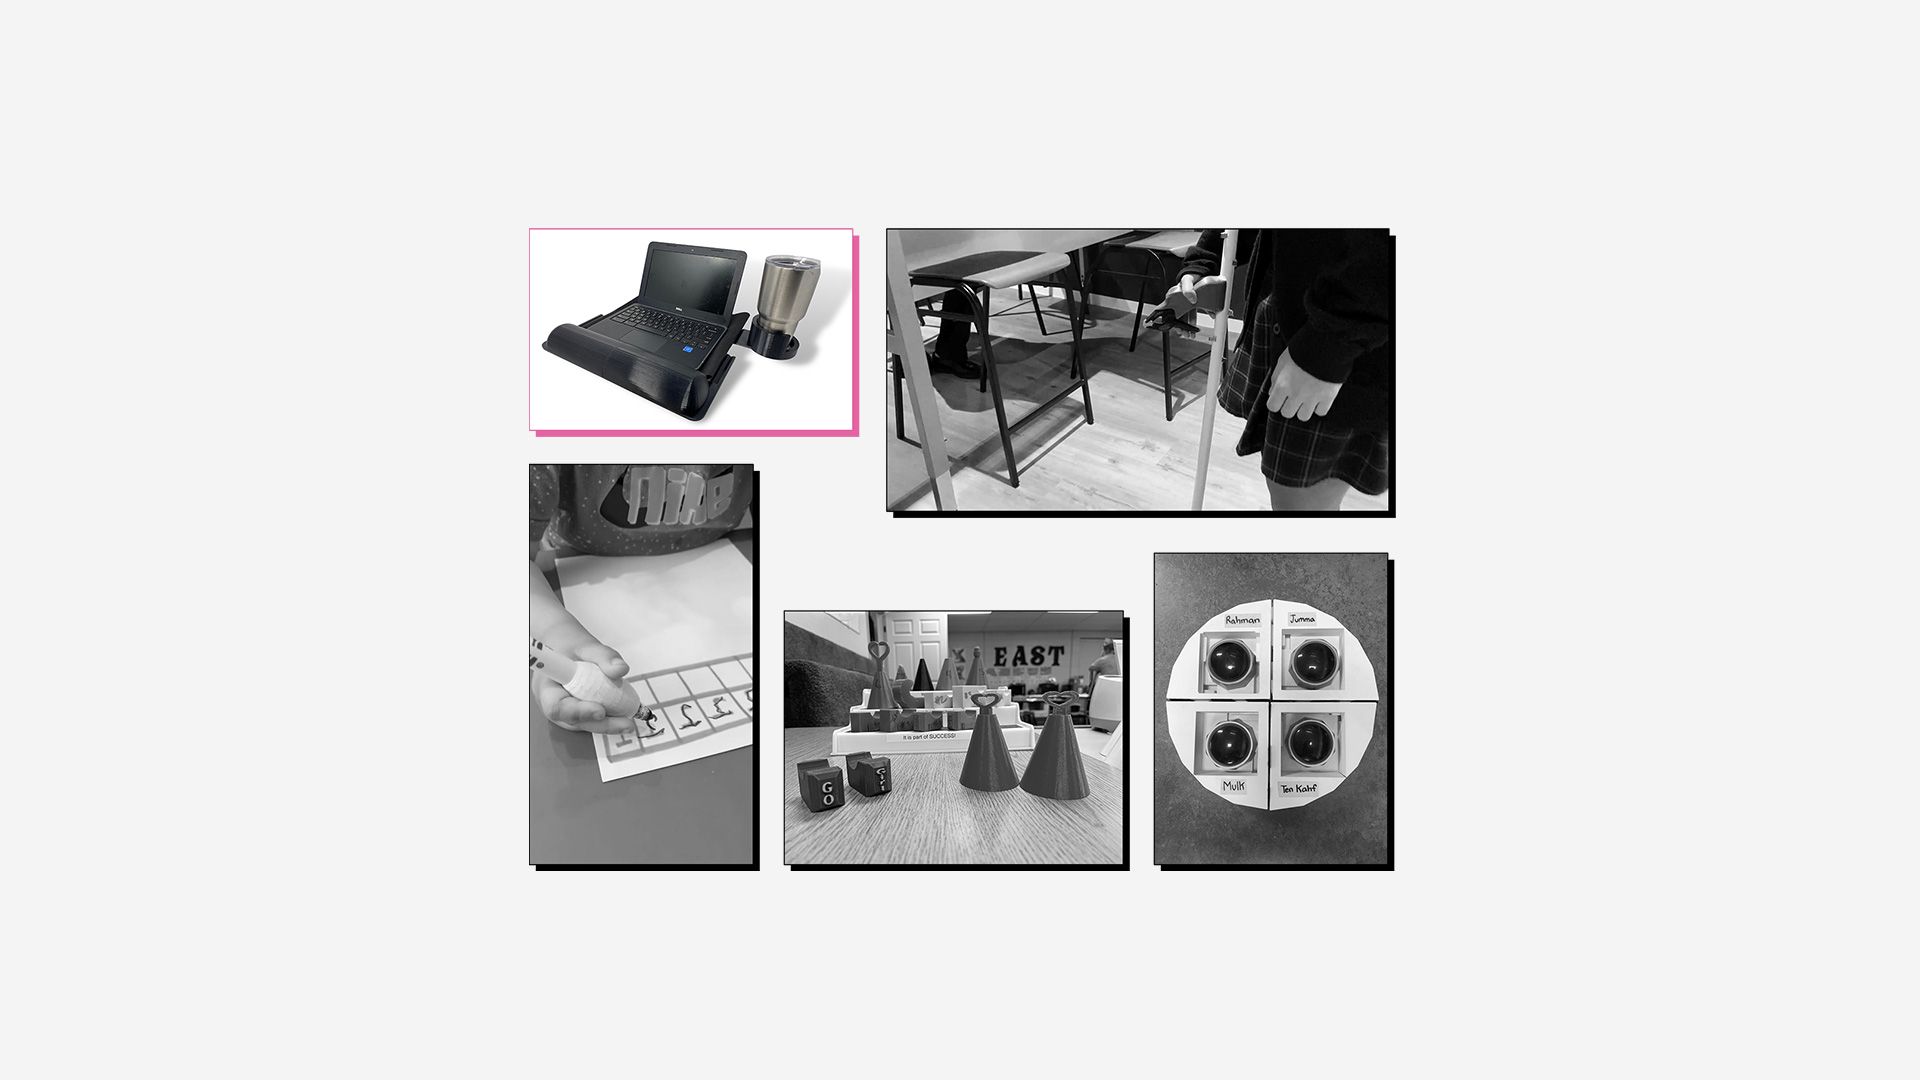 Collage of 3D printed assistive devices with winning entry (wheelchair cup holder) highlighted.